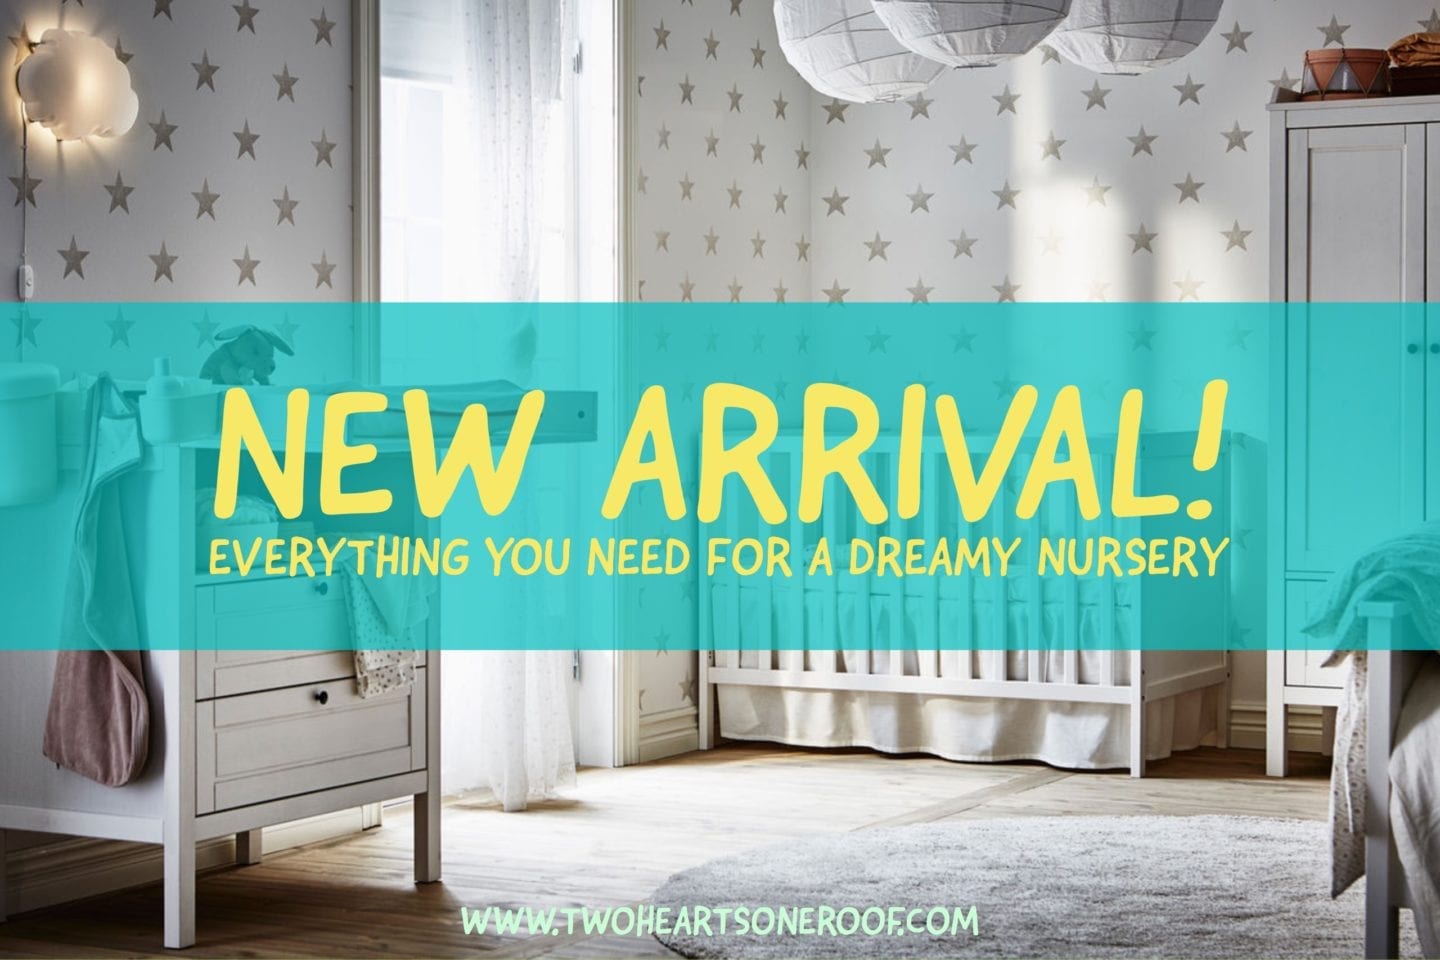 New Arrival! Everything You Need For A Dreamy Nursery